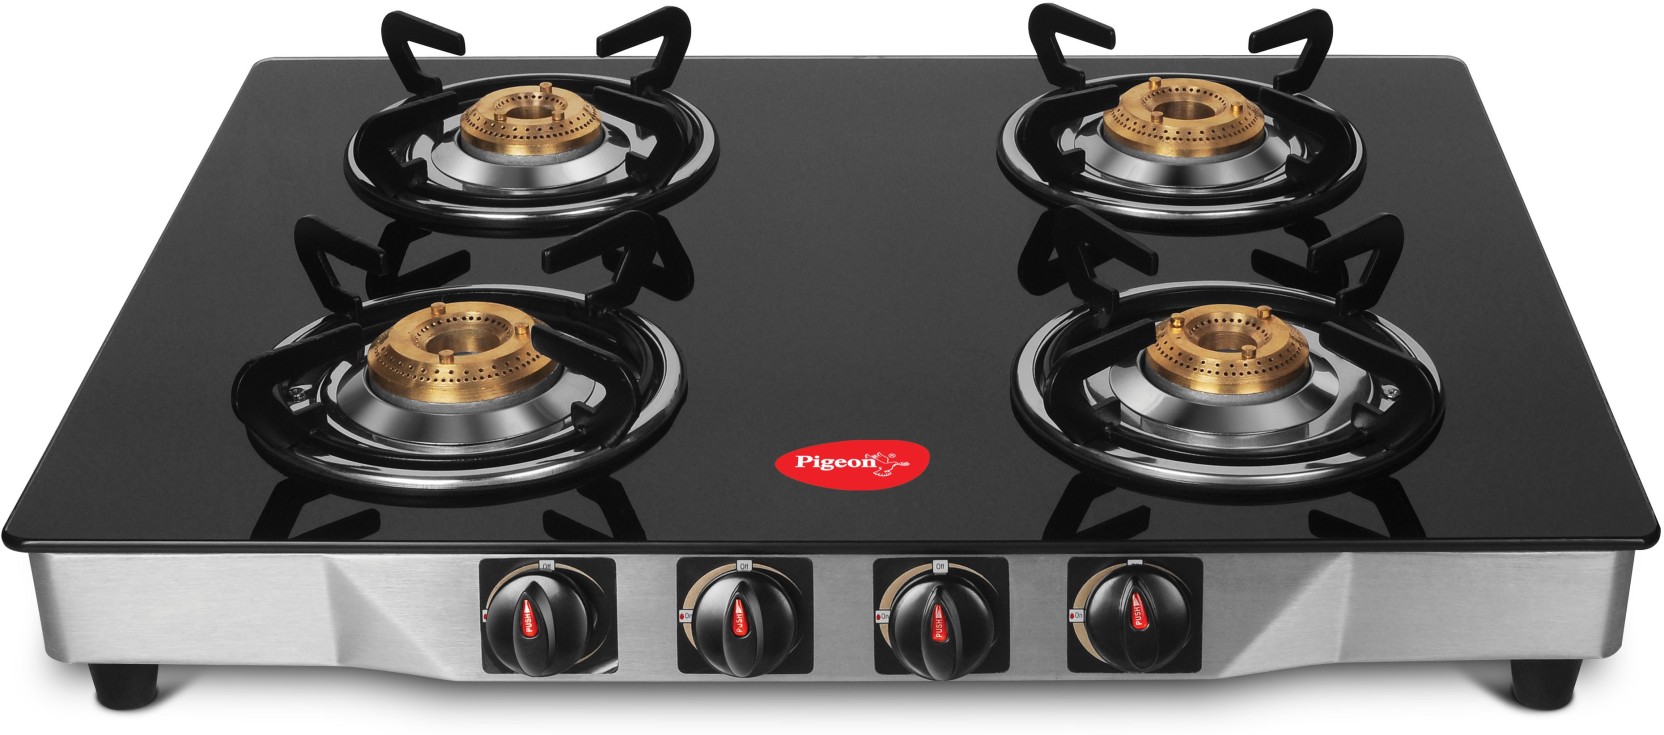 Gas Stove Gallery In Pune | SURYAJYOTI GAS GALLERY | Gas Stove Dealers In Hadapsar, Gas Stove Shop In Hadapsar, Gas Stove Supplier In Hadapsar, Digital Gas Stove Dealers In Hadapsar, Gas Burner In Hadapsar, Gas Chulha In Hadapsar, Best, Gas, Stove, Shop - GL19258